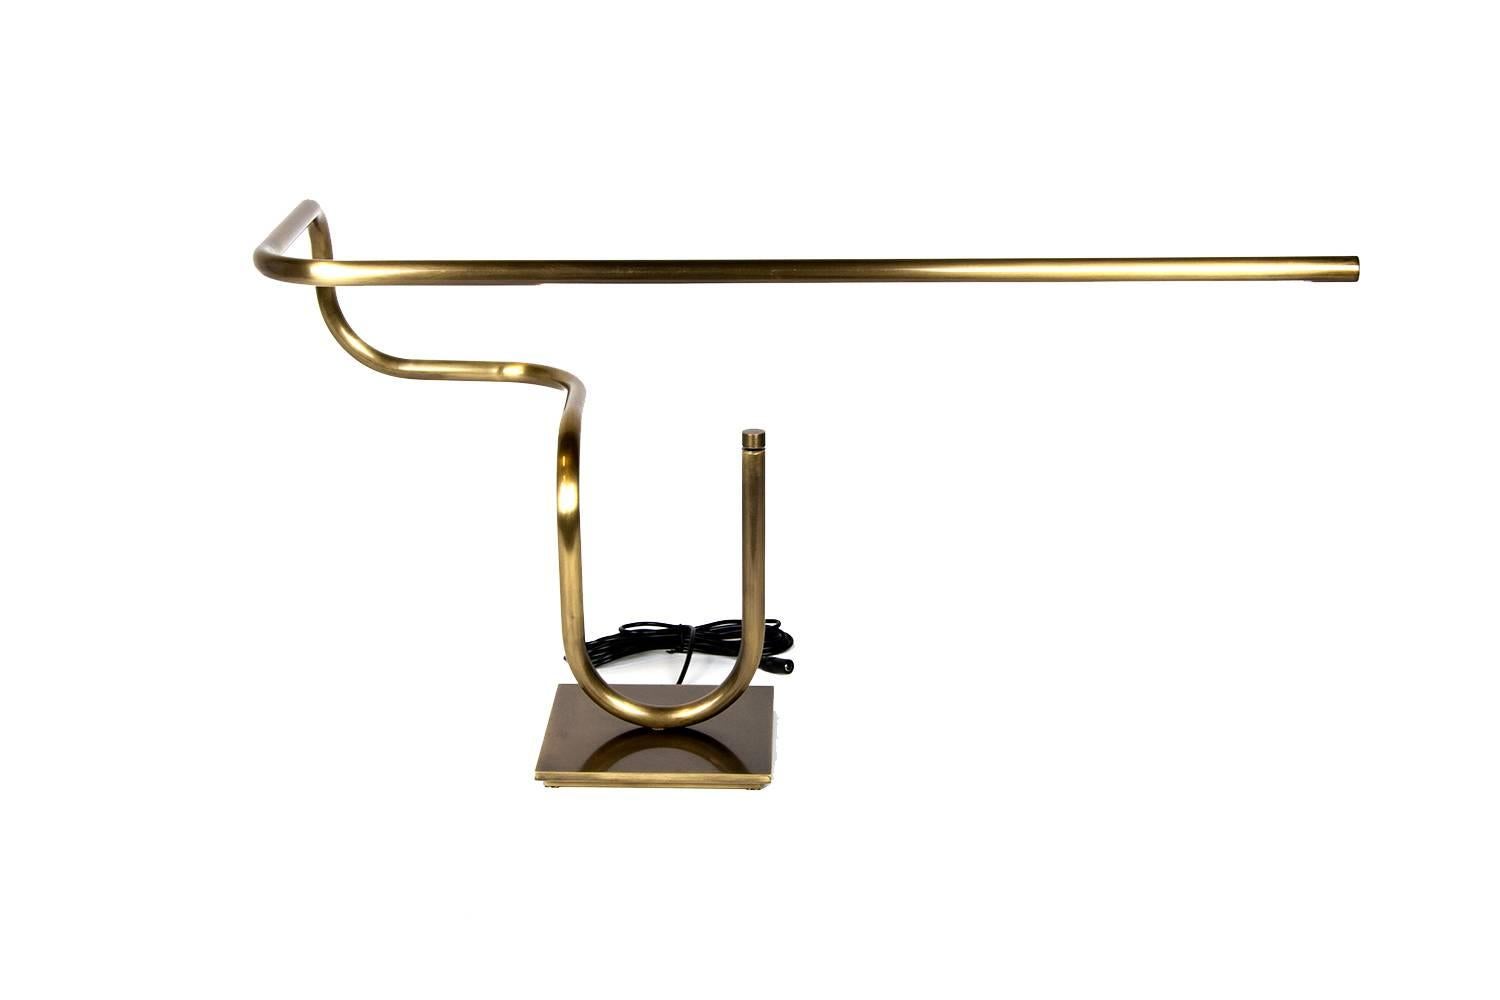 Inspired by the art of Sumi-e, Japanese black ink drawing, the lamp flows as if stroked in one consecutive line. The dimmable LED desk lamp is available in two finishes, darkened brass or tarnished brass, all handcrafted in Chicago.
*In-stock*